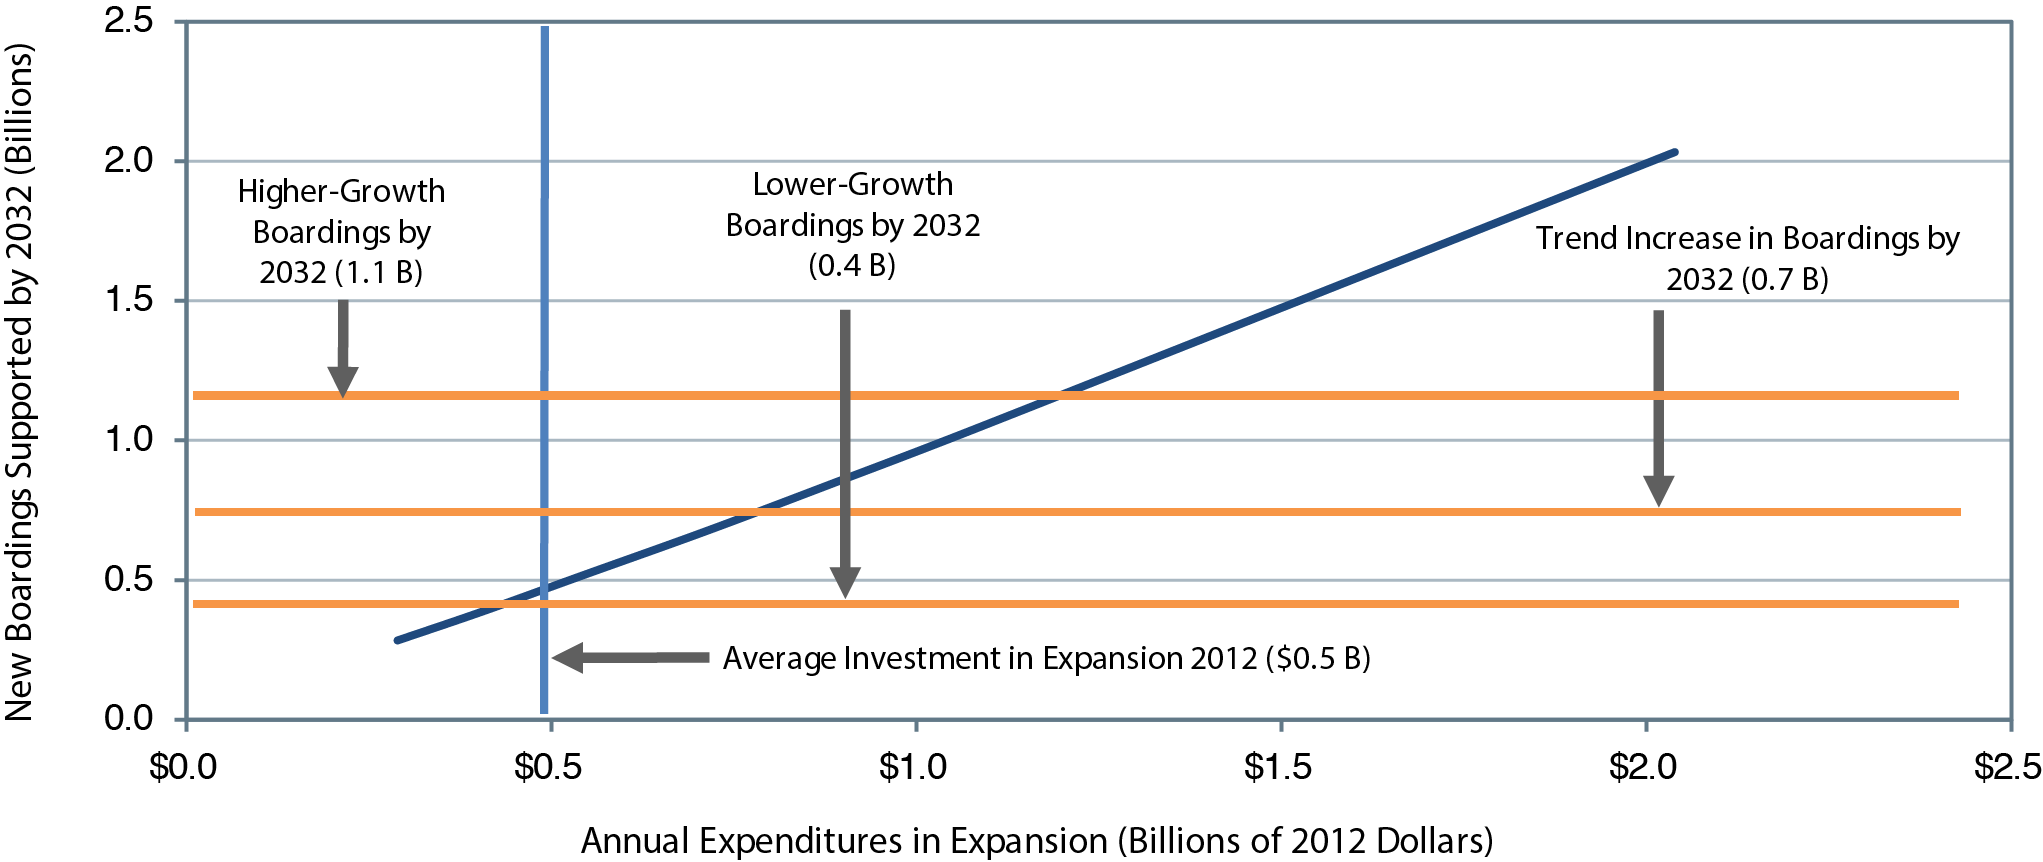 A line chart plots new boardings supported by the year 2032 over annual expenditures in expansion. The plot has an initial value of 0.3 billion new riders supported annually at an annual expenditure of $0.3 billion, and trends upward to a value of 2.0 billion new riders supported at an annual expenditure of $2.0 billion. The plot intersects with the trend increase of 0.7 billion in boardings by 2032 at an annual expenditure of $0.7 billion.<em>Source: Transit Economic Requirements Model. 